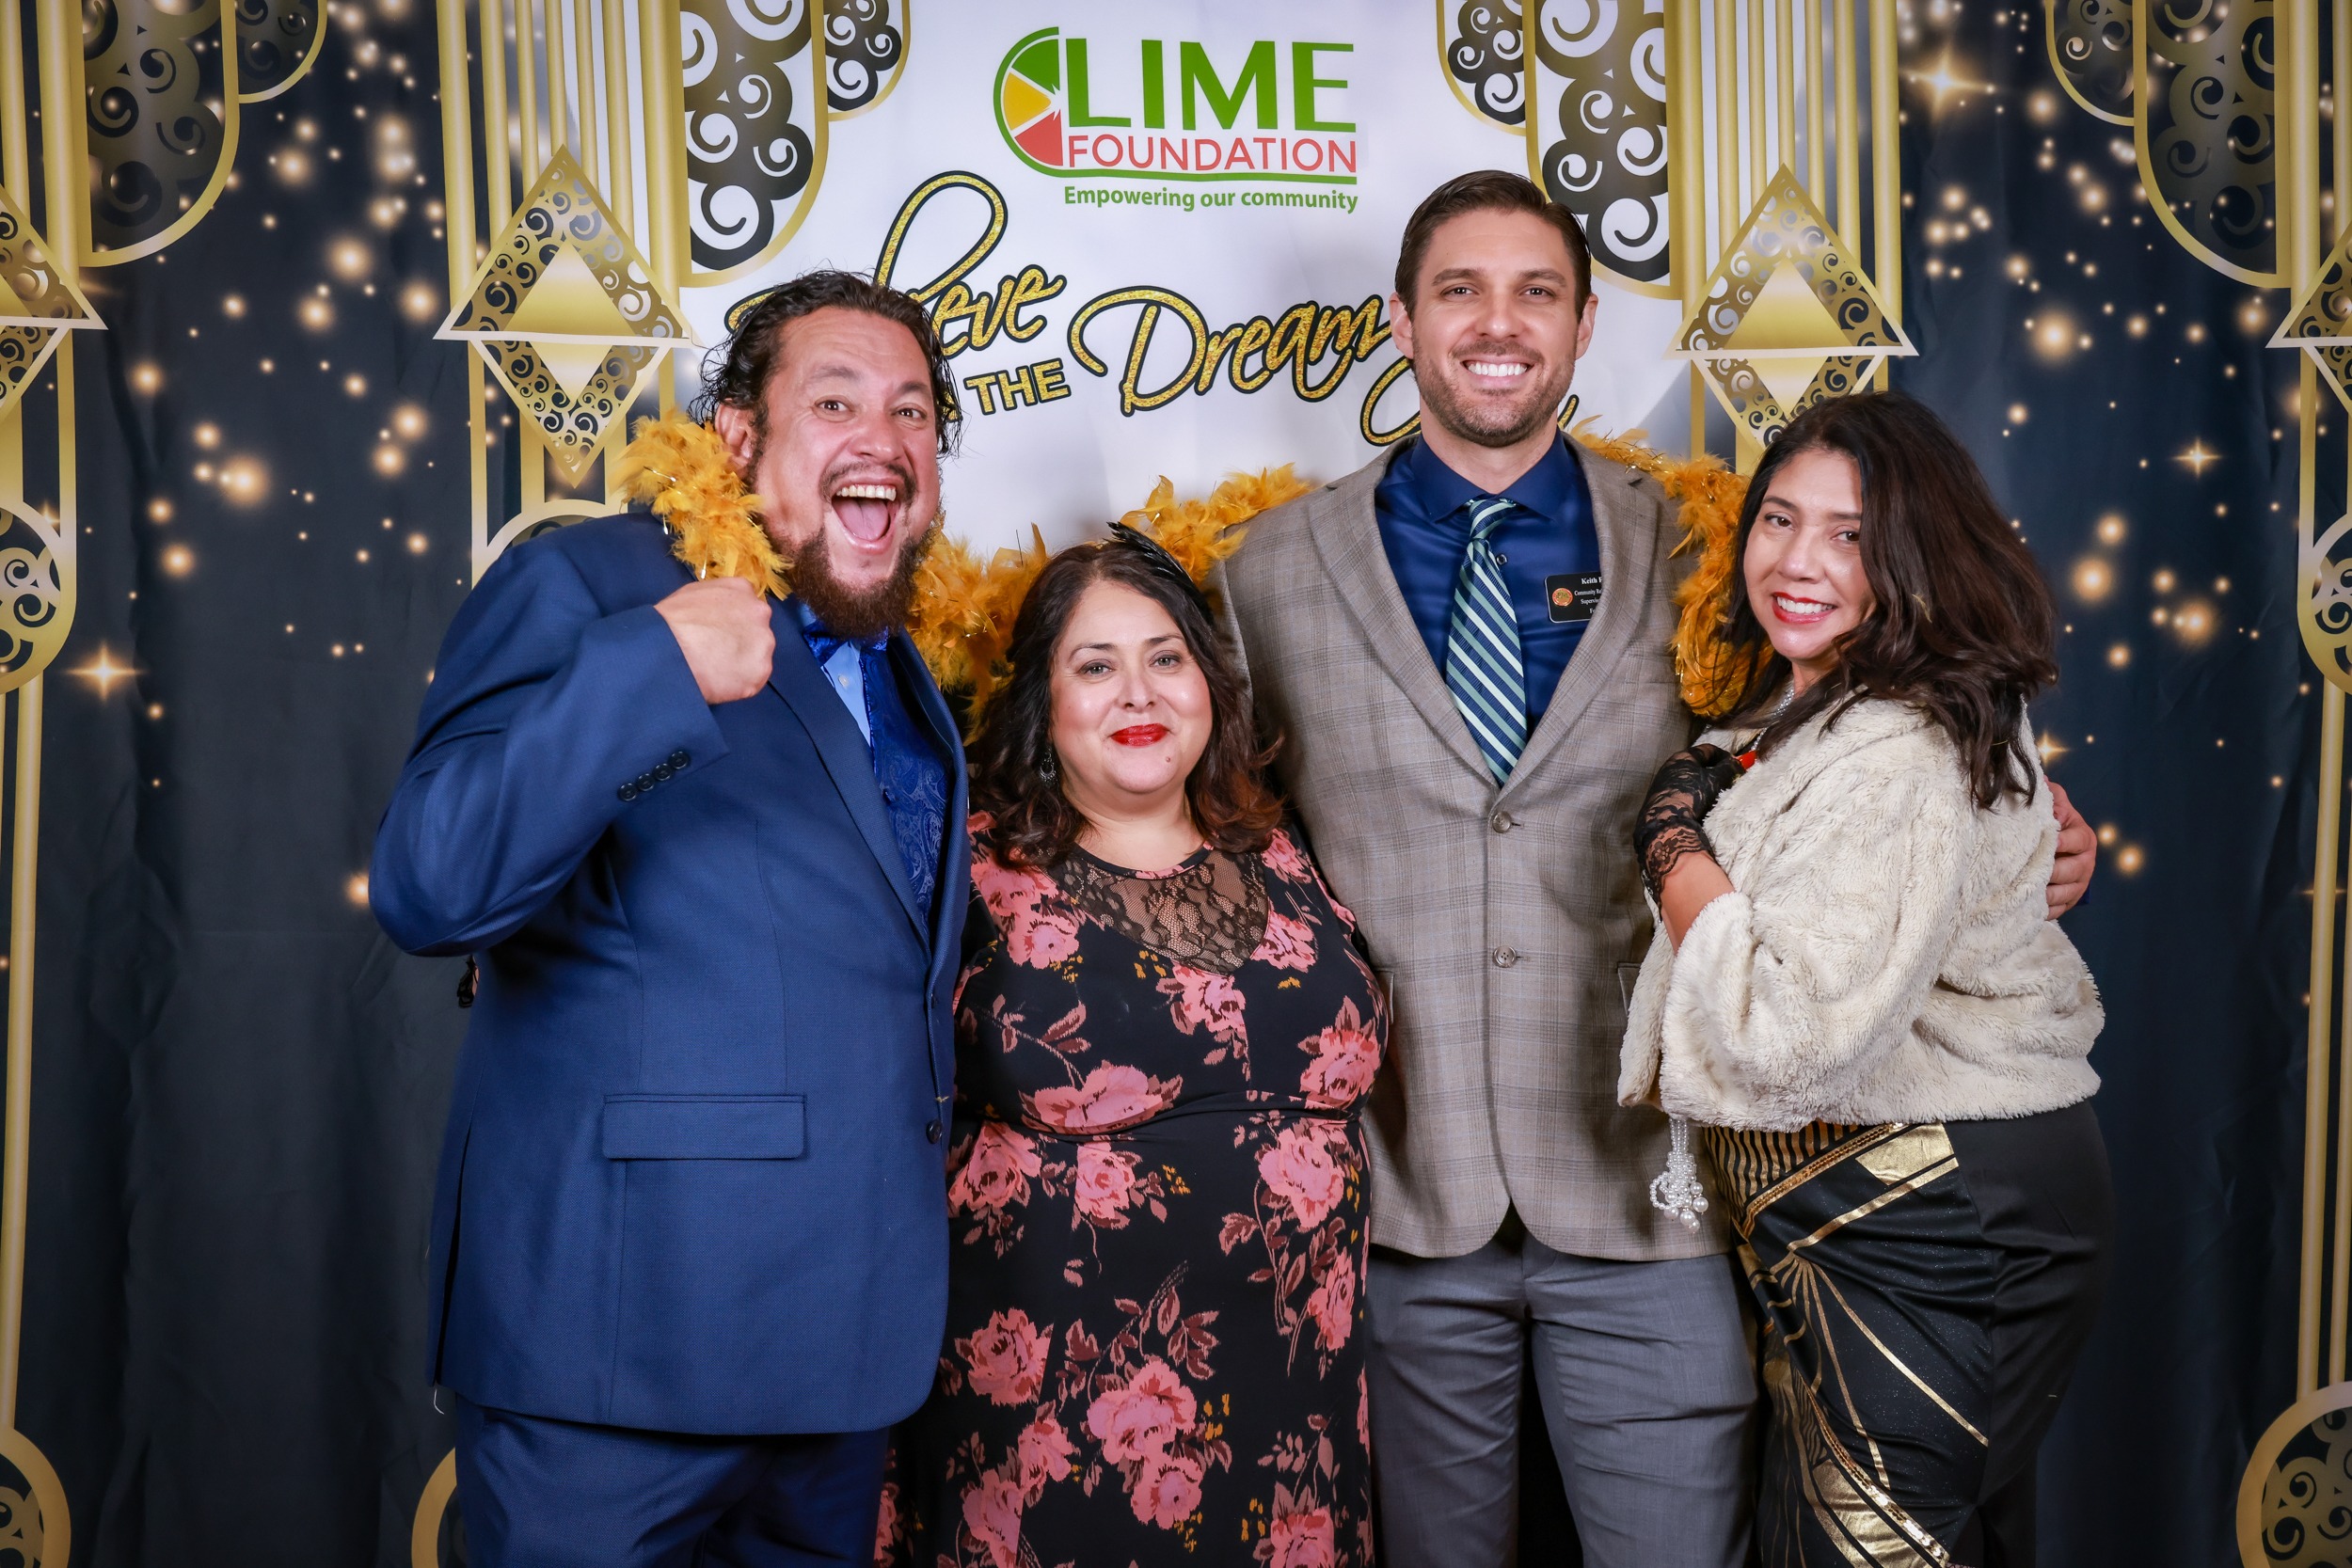 A group of people posing for a photo at a photo booth during an event hosted by The LIME Foundation of Santa Rosa.